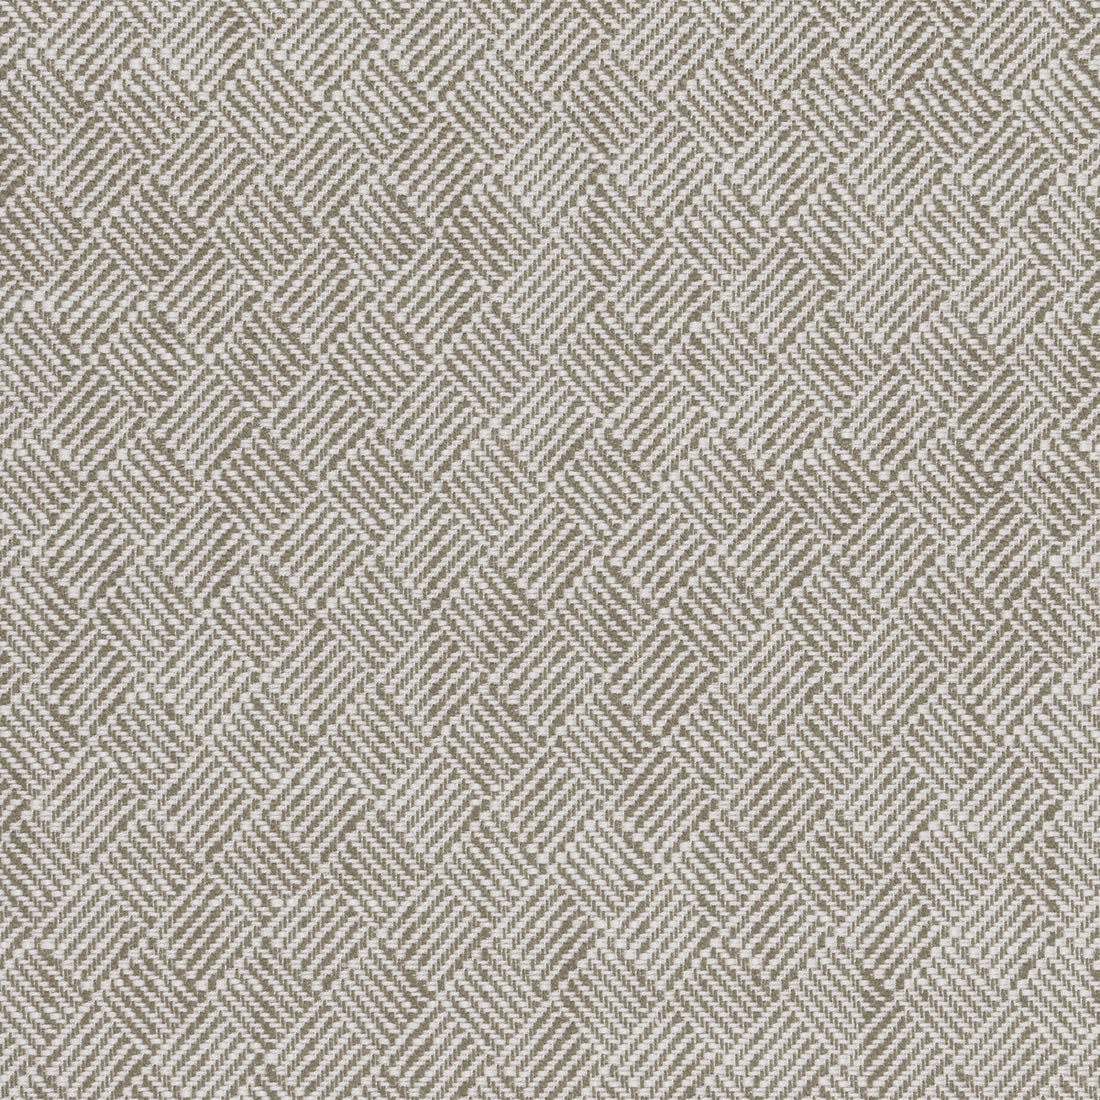 Kravet Design fabric in 36088-11 color - pattern 36088.11.0 - by Kravet Design in the Inside Out Performance Fabrics collection